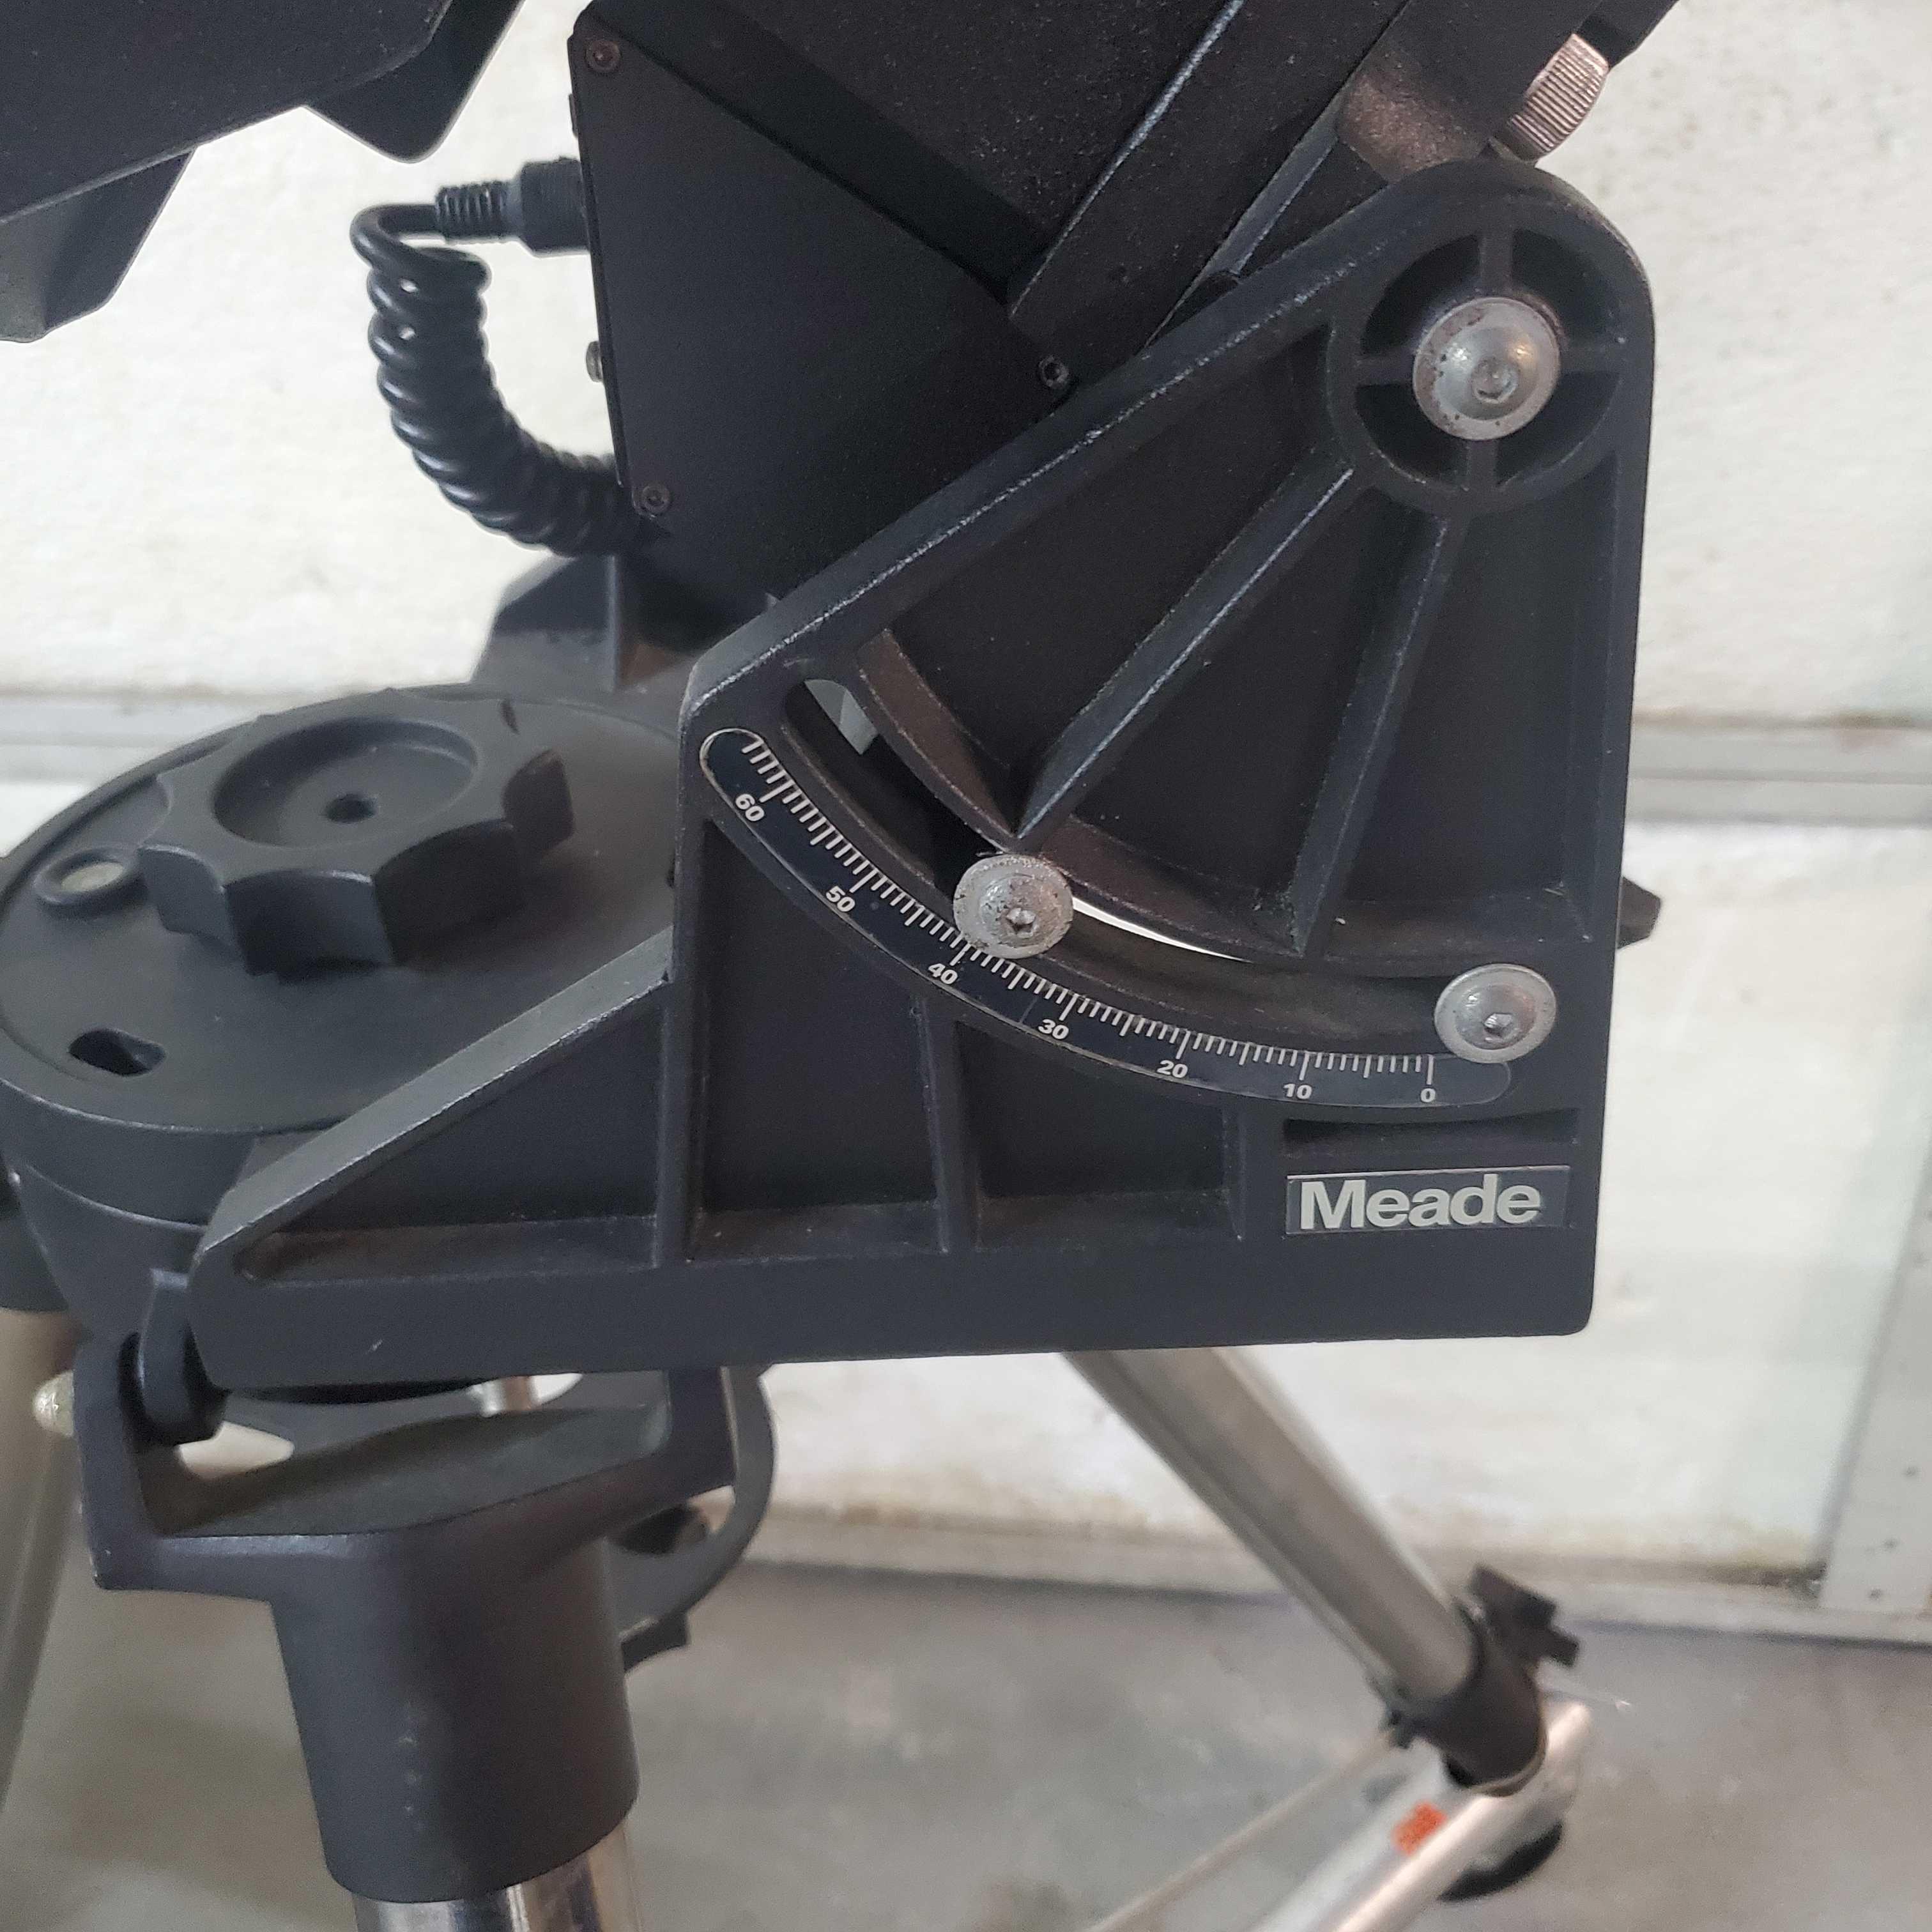 10" Meade 2120 LX6 Telescope With Accessories